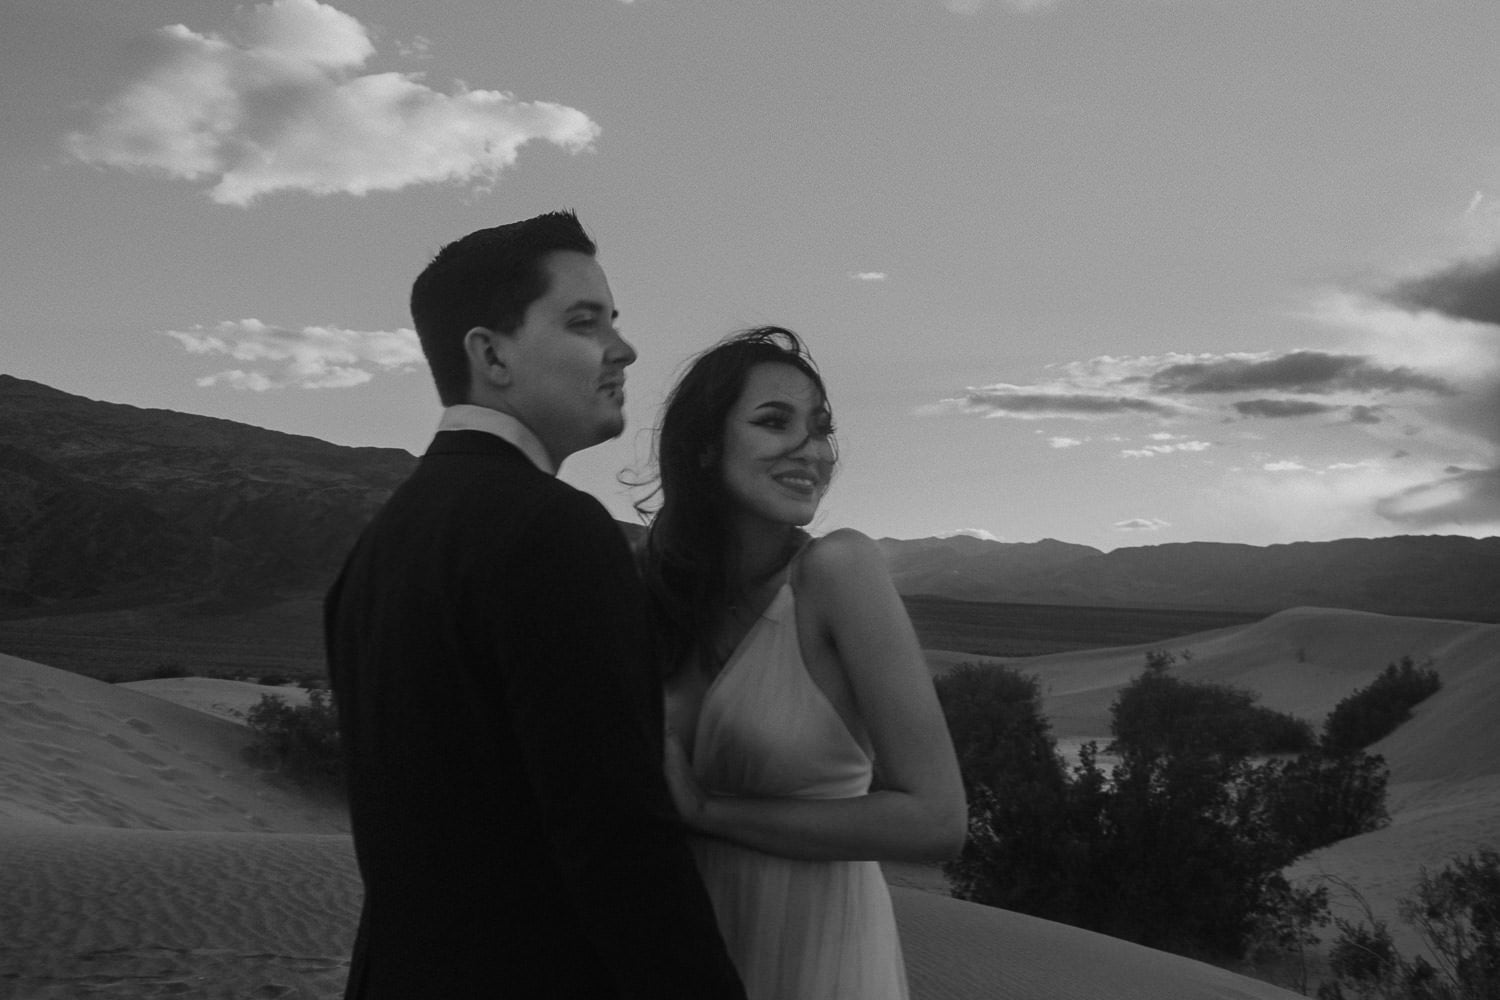 Black and white image of an Oregon elopement couple in the desert at sunset. The bride's hair blows in her face from the wind as they both look out into the distance at the amazing scenery they are about to get married in.